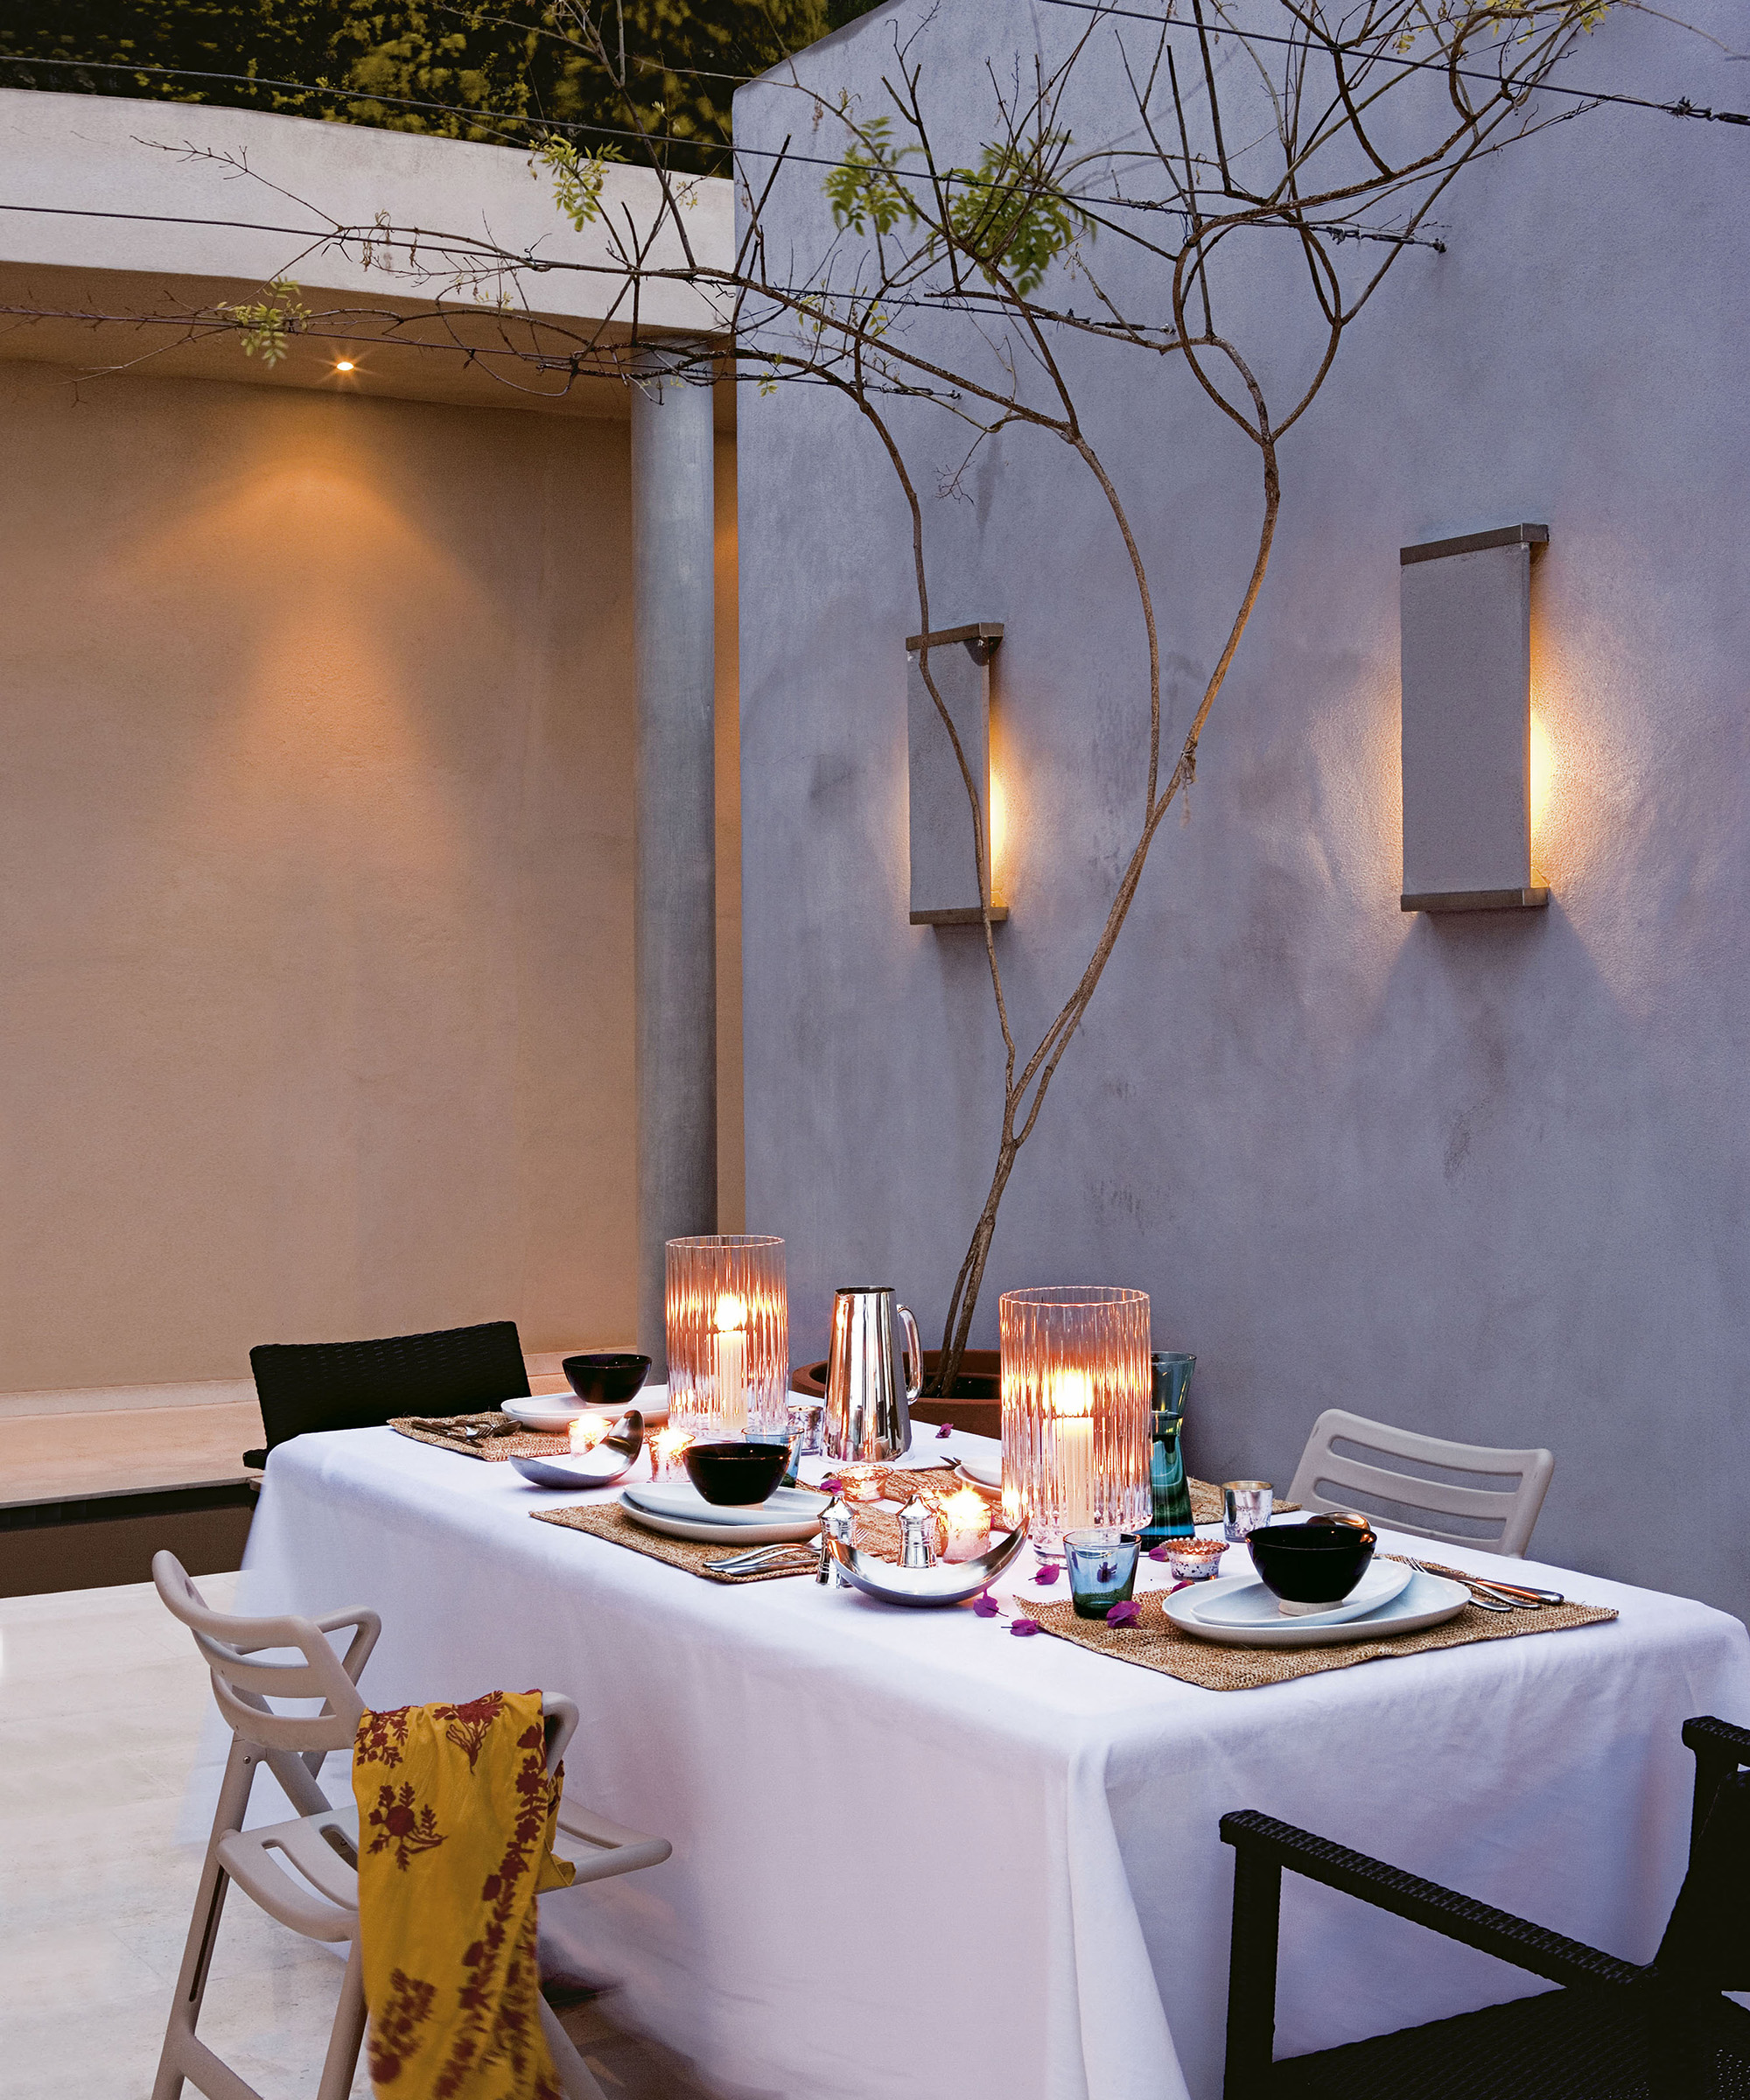 A garden seating area with ambient wall lights and candles lit on the dining table